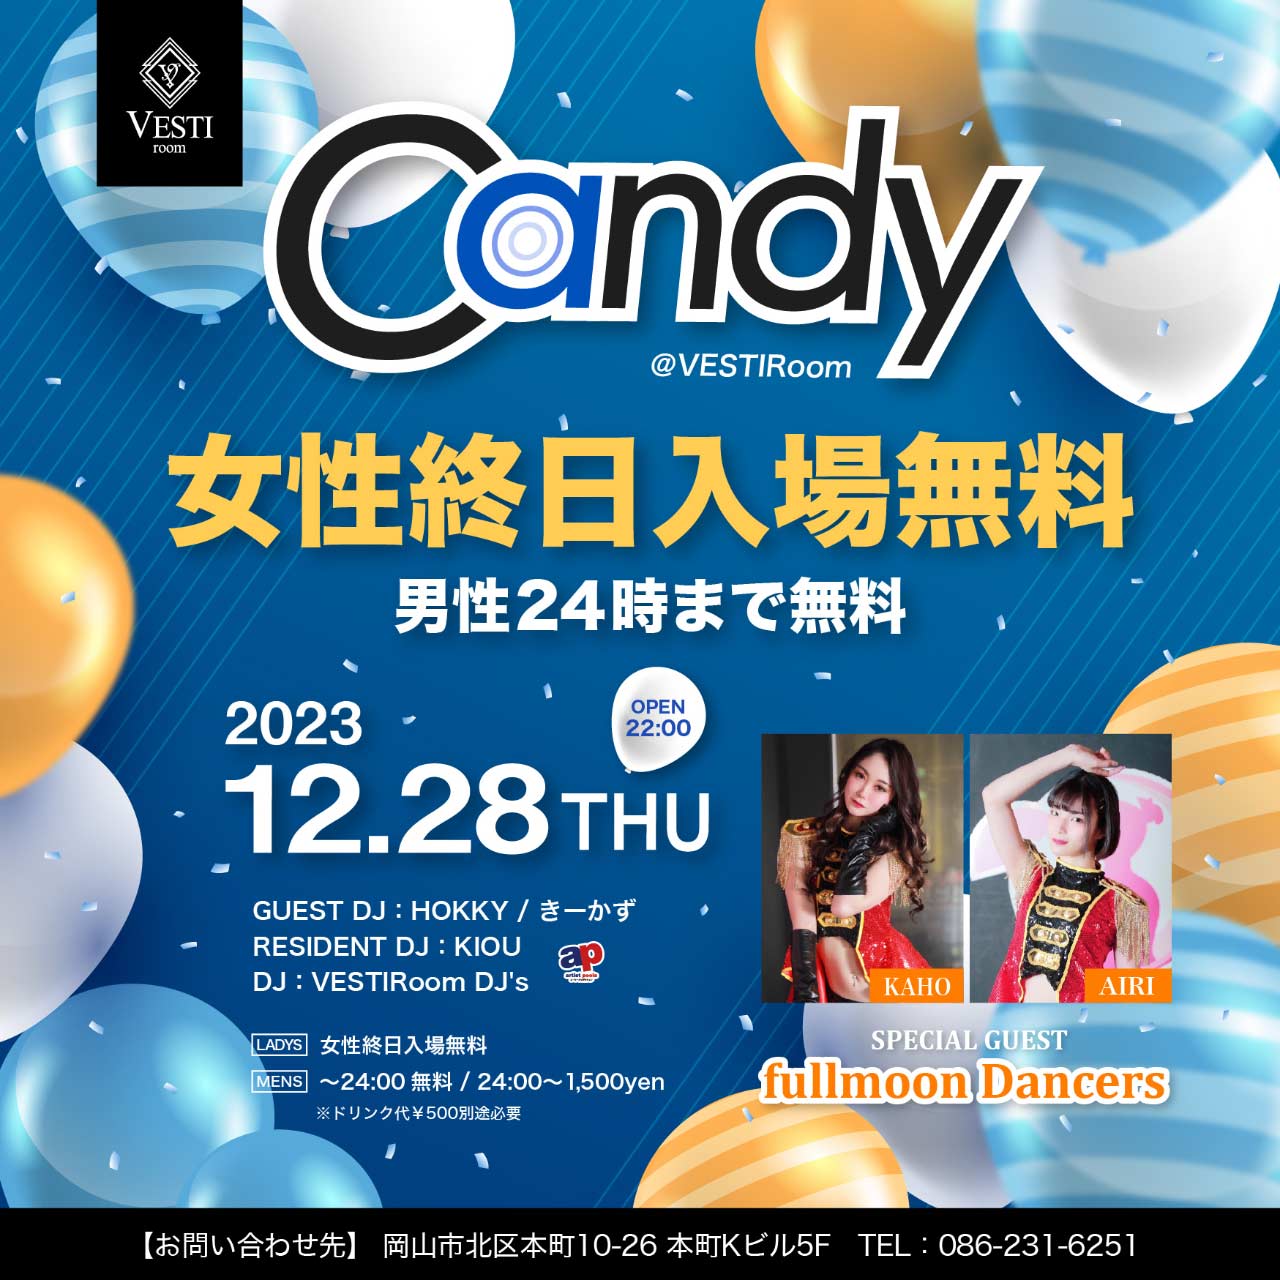 【Candy】SPECIAL GUEST : fullmoon dancers ～女性終日入場無料～